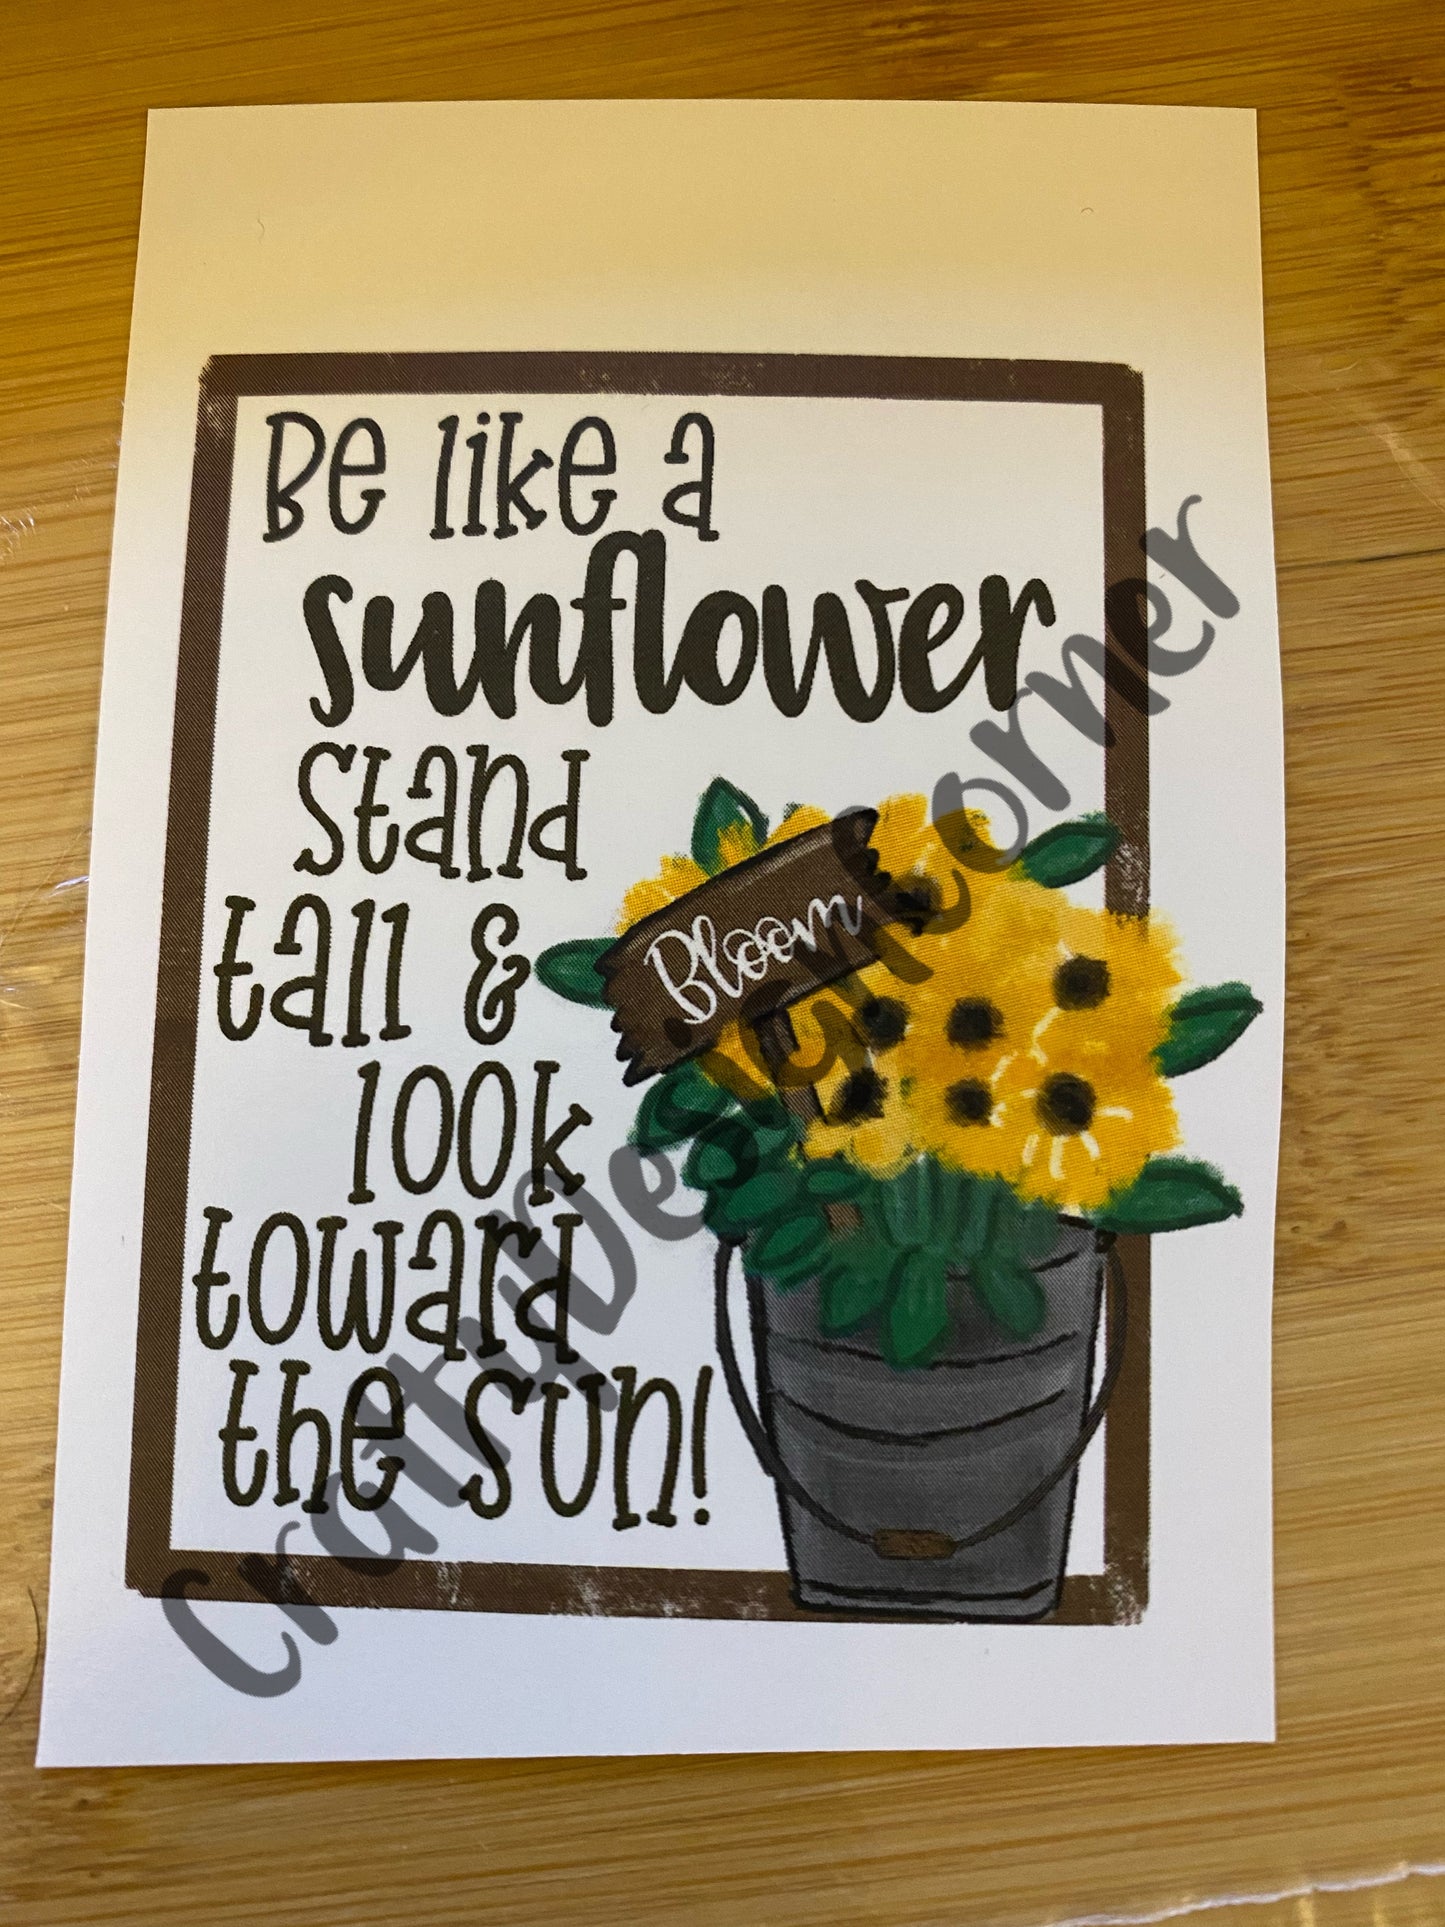 Be like a Sunflower and Stand Tall & look to the Sun WATER SLIDE